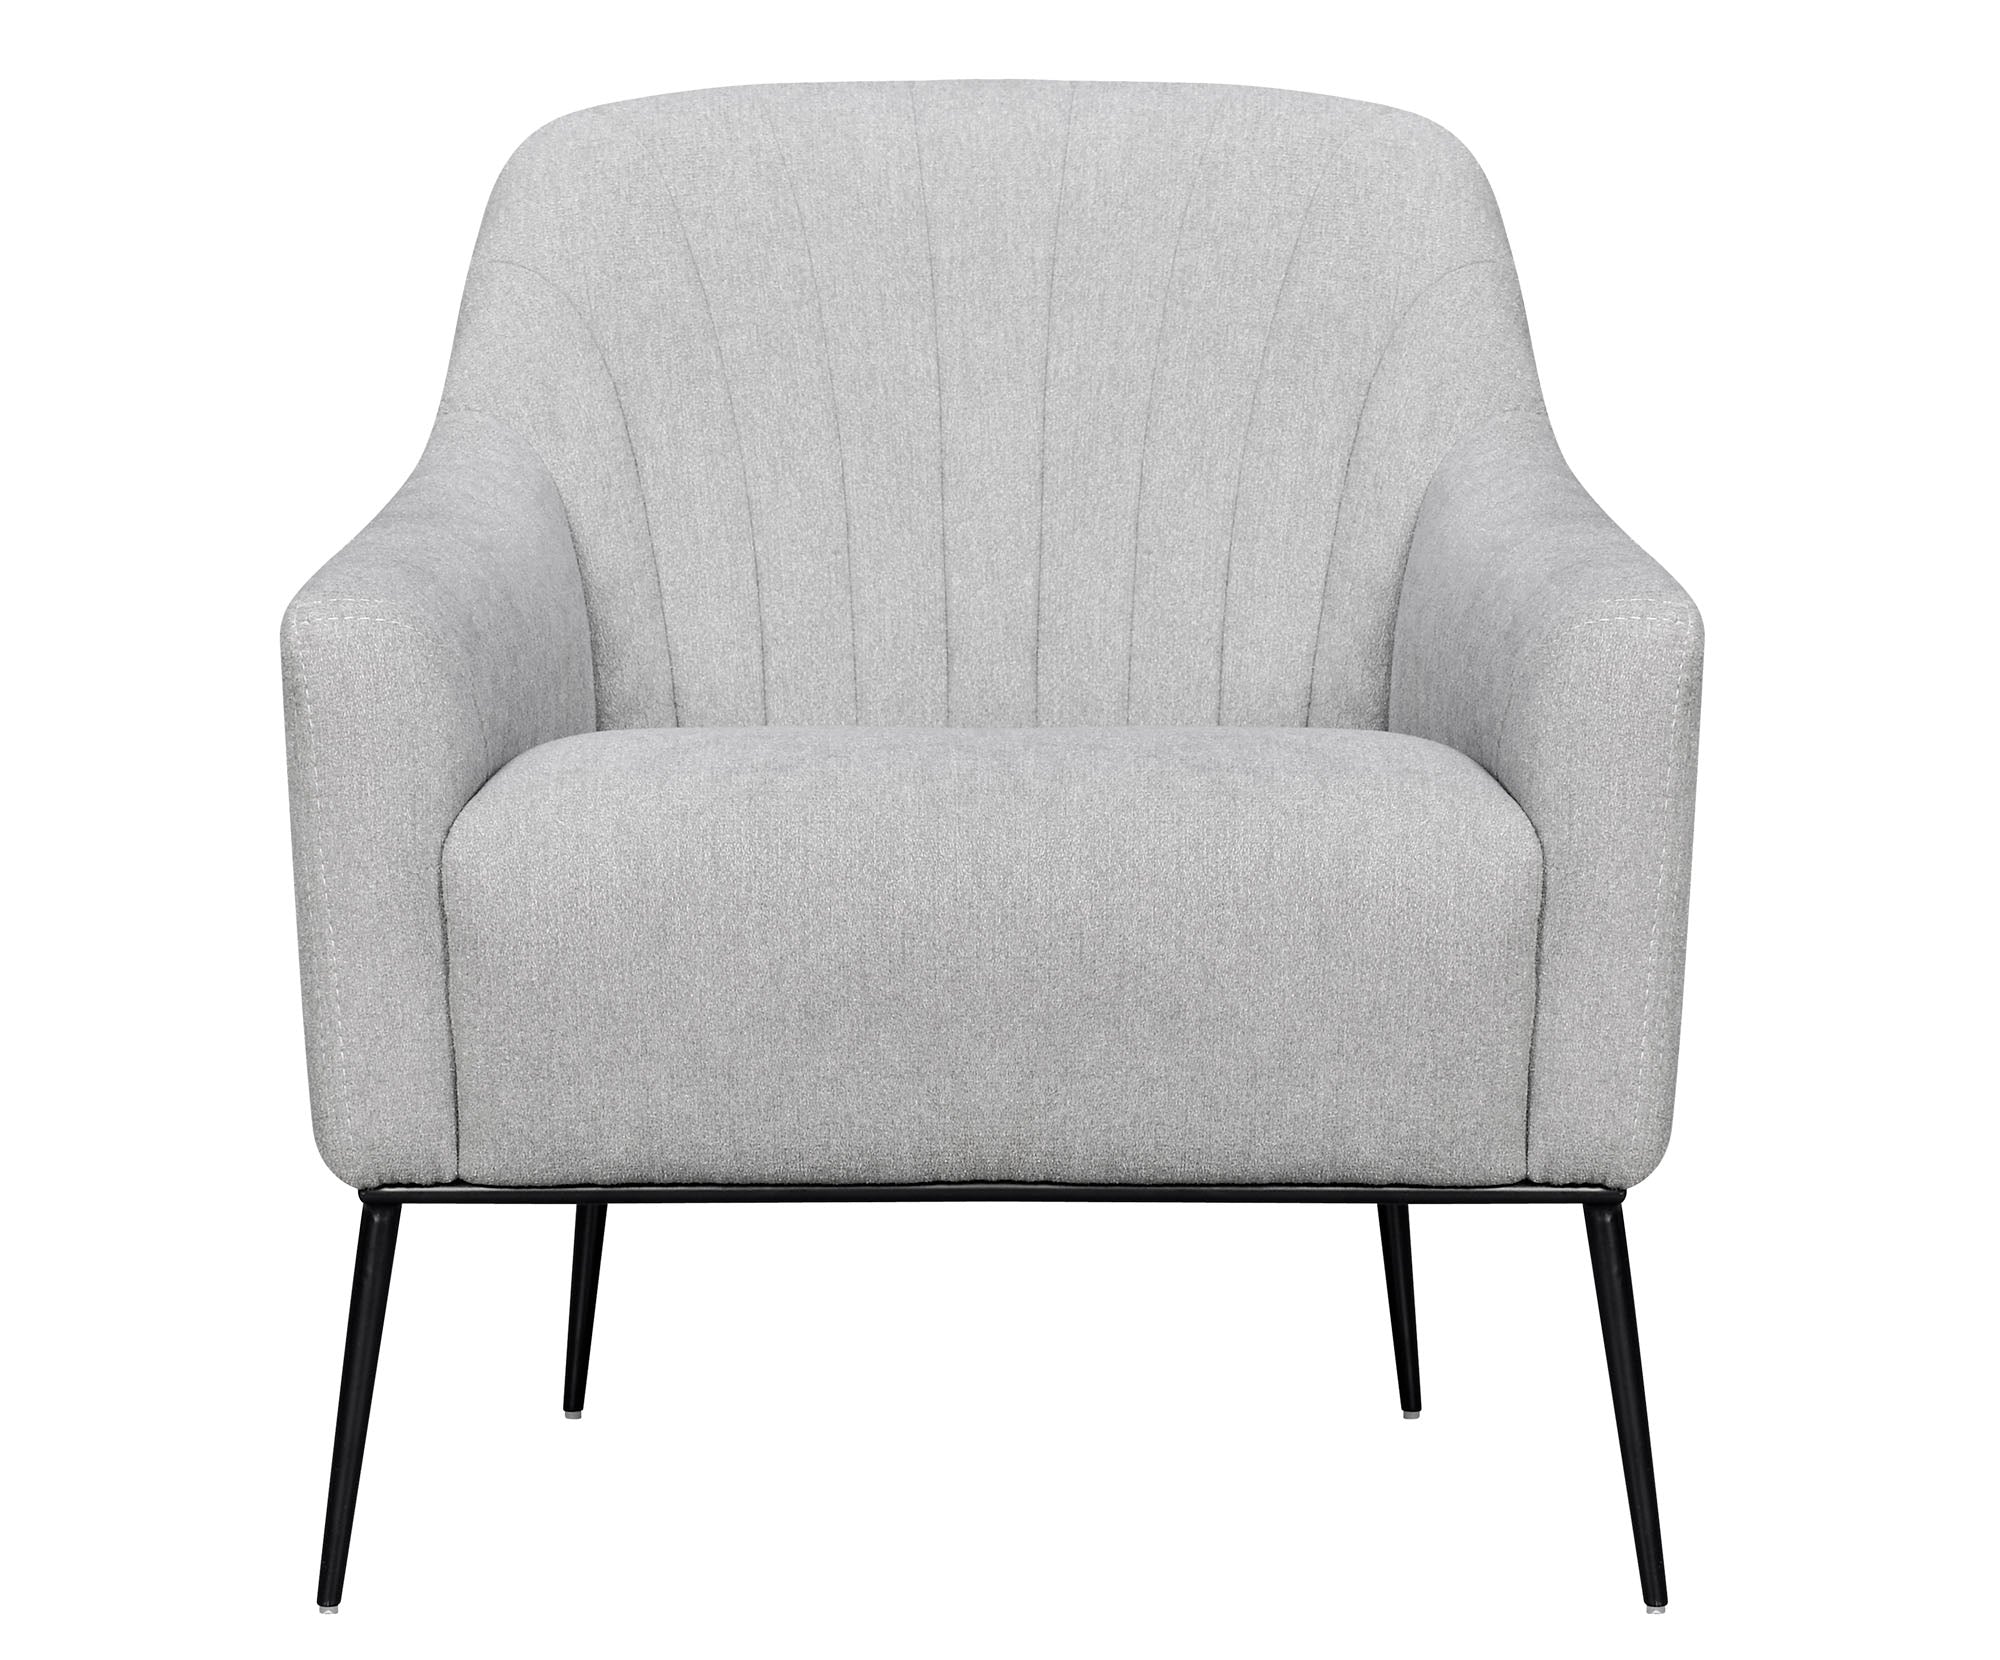 Nickel Channel Accent Chair - MJM Furniture